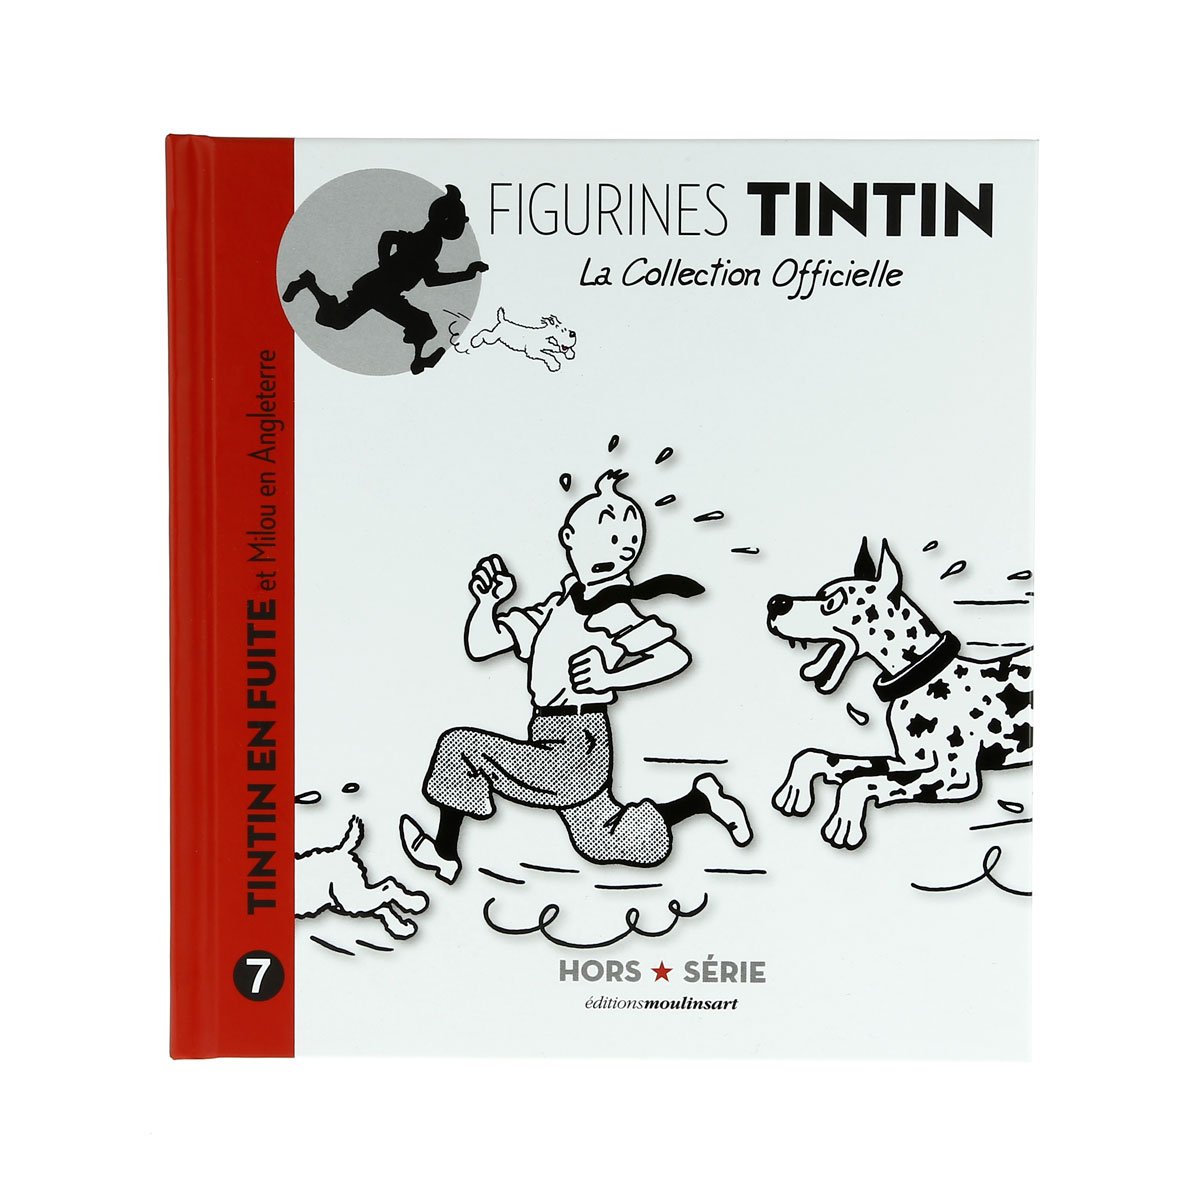 Resin figurine Tintin, Snowy and the Great Dane